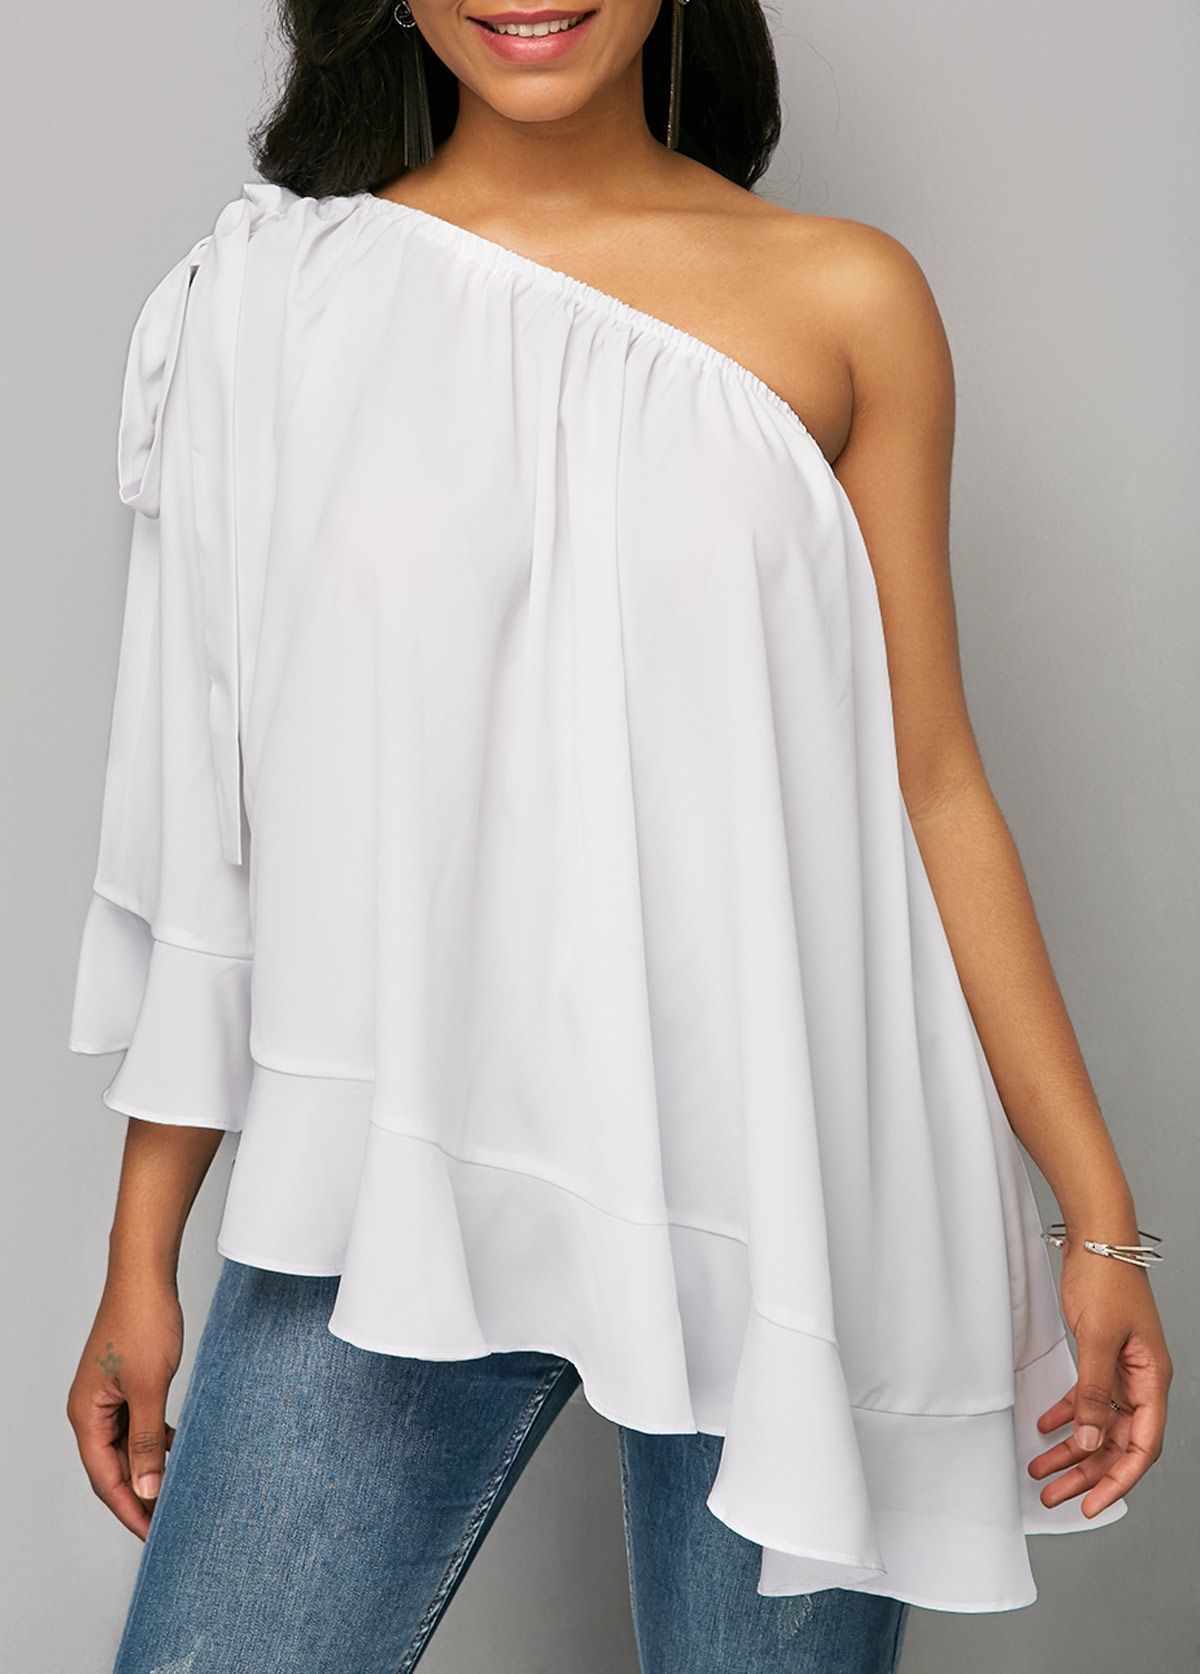 Solid White One Shoulder Ruffle Blouse | modlily.com - USD $13.99